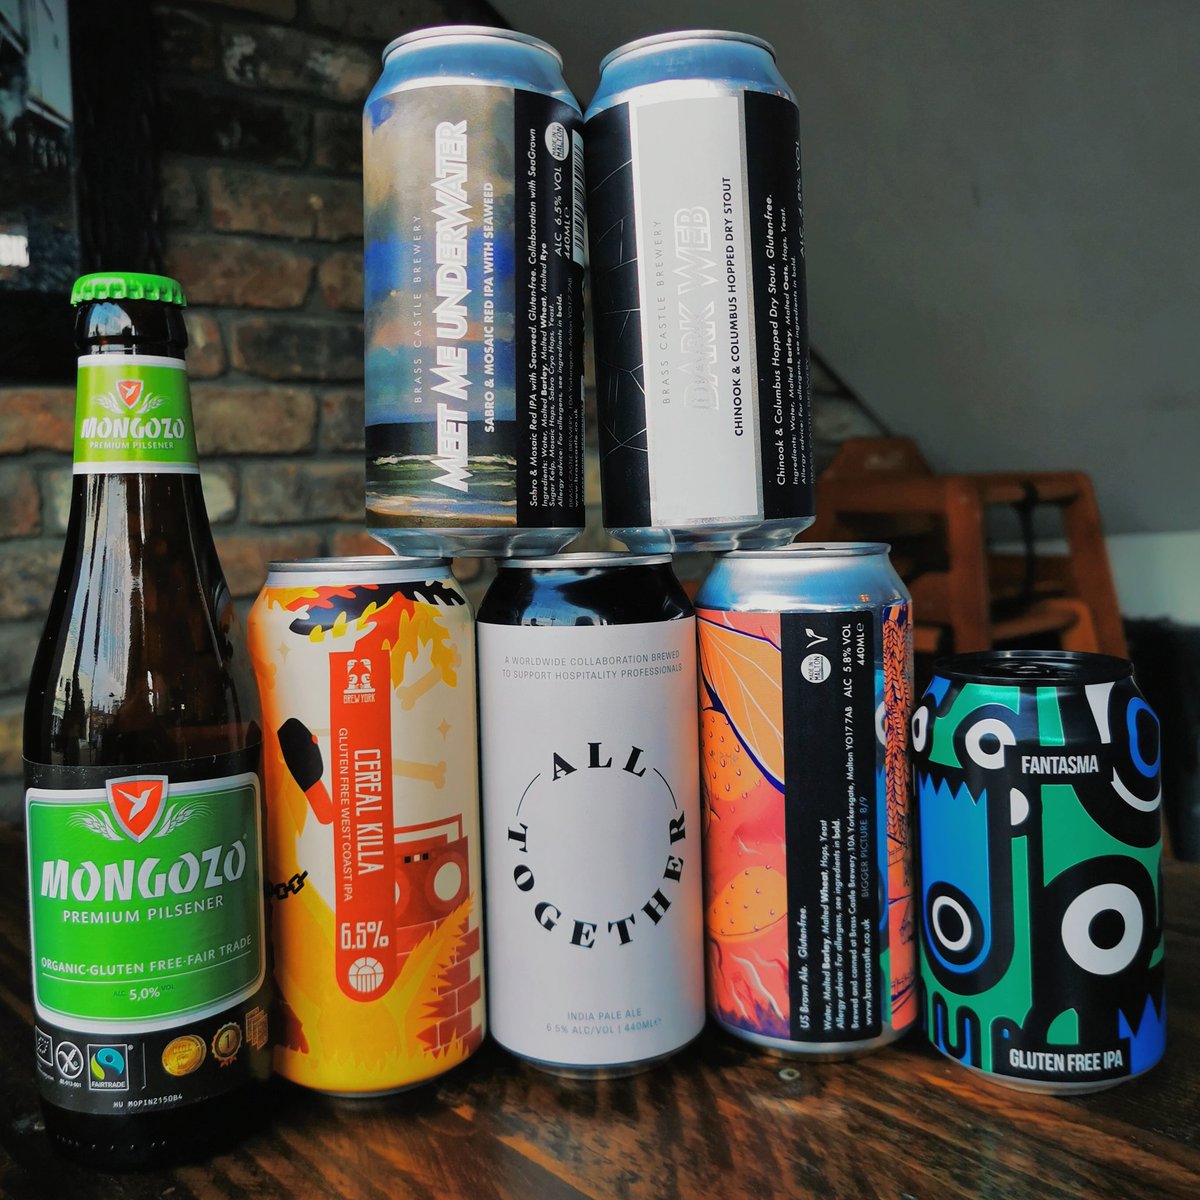 Are you following a #glutenfree diet? We have a range of #GFbeer and #lowinglutenbeer in our fridges just waiting for you! From @BrassCastleBeer @brewyorkbeer @magicrockbrewing @mongozo_beers ✨✨✨

#GF #glutenfreeliving